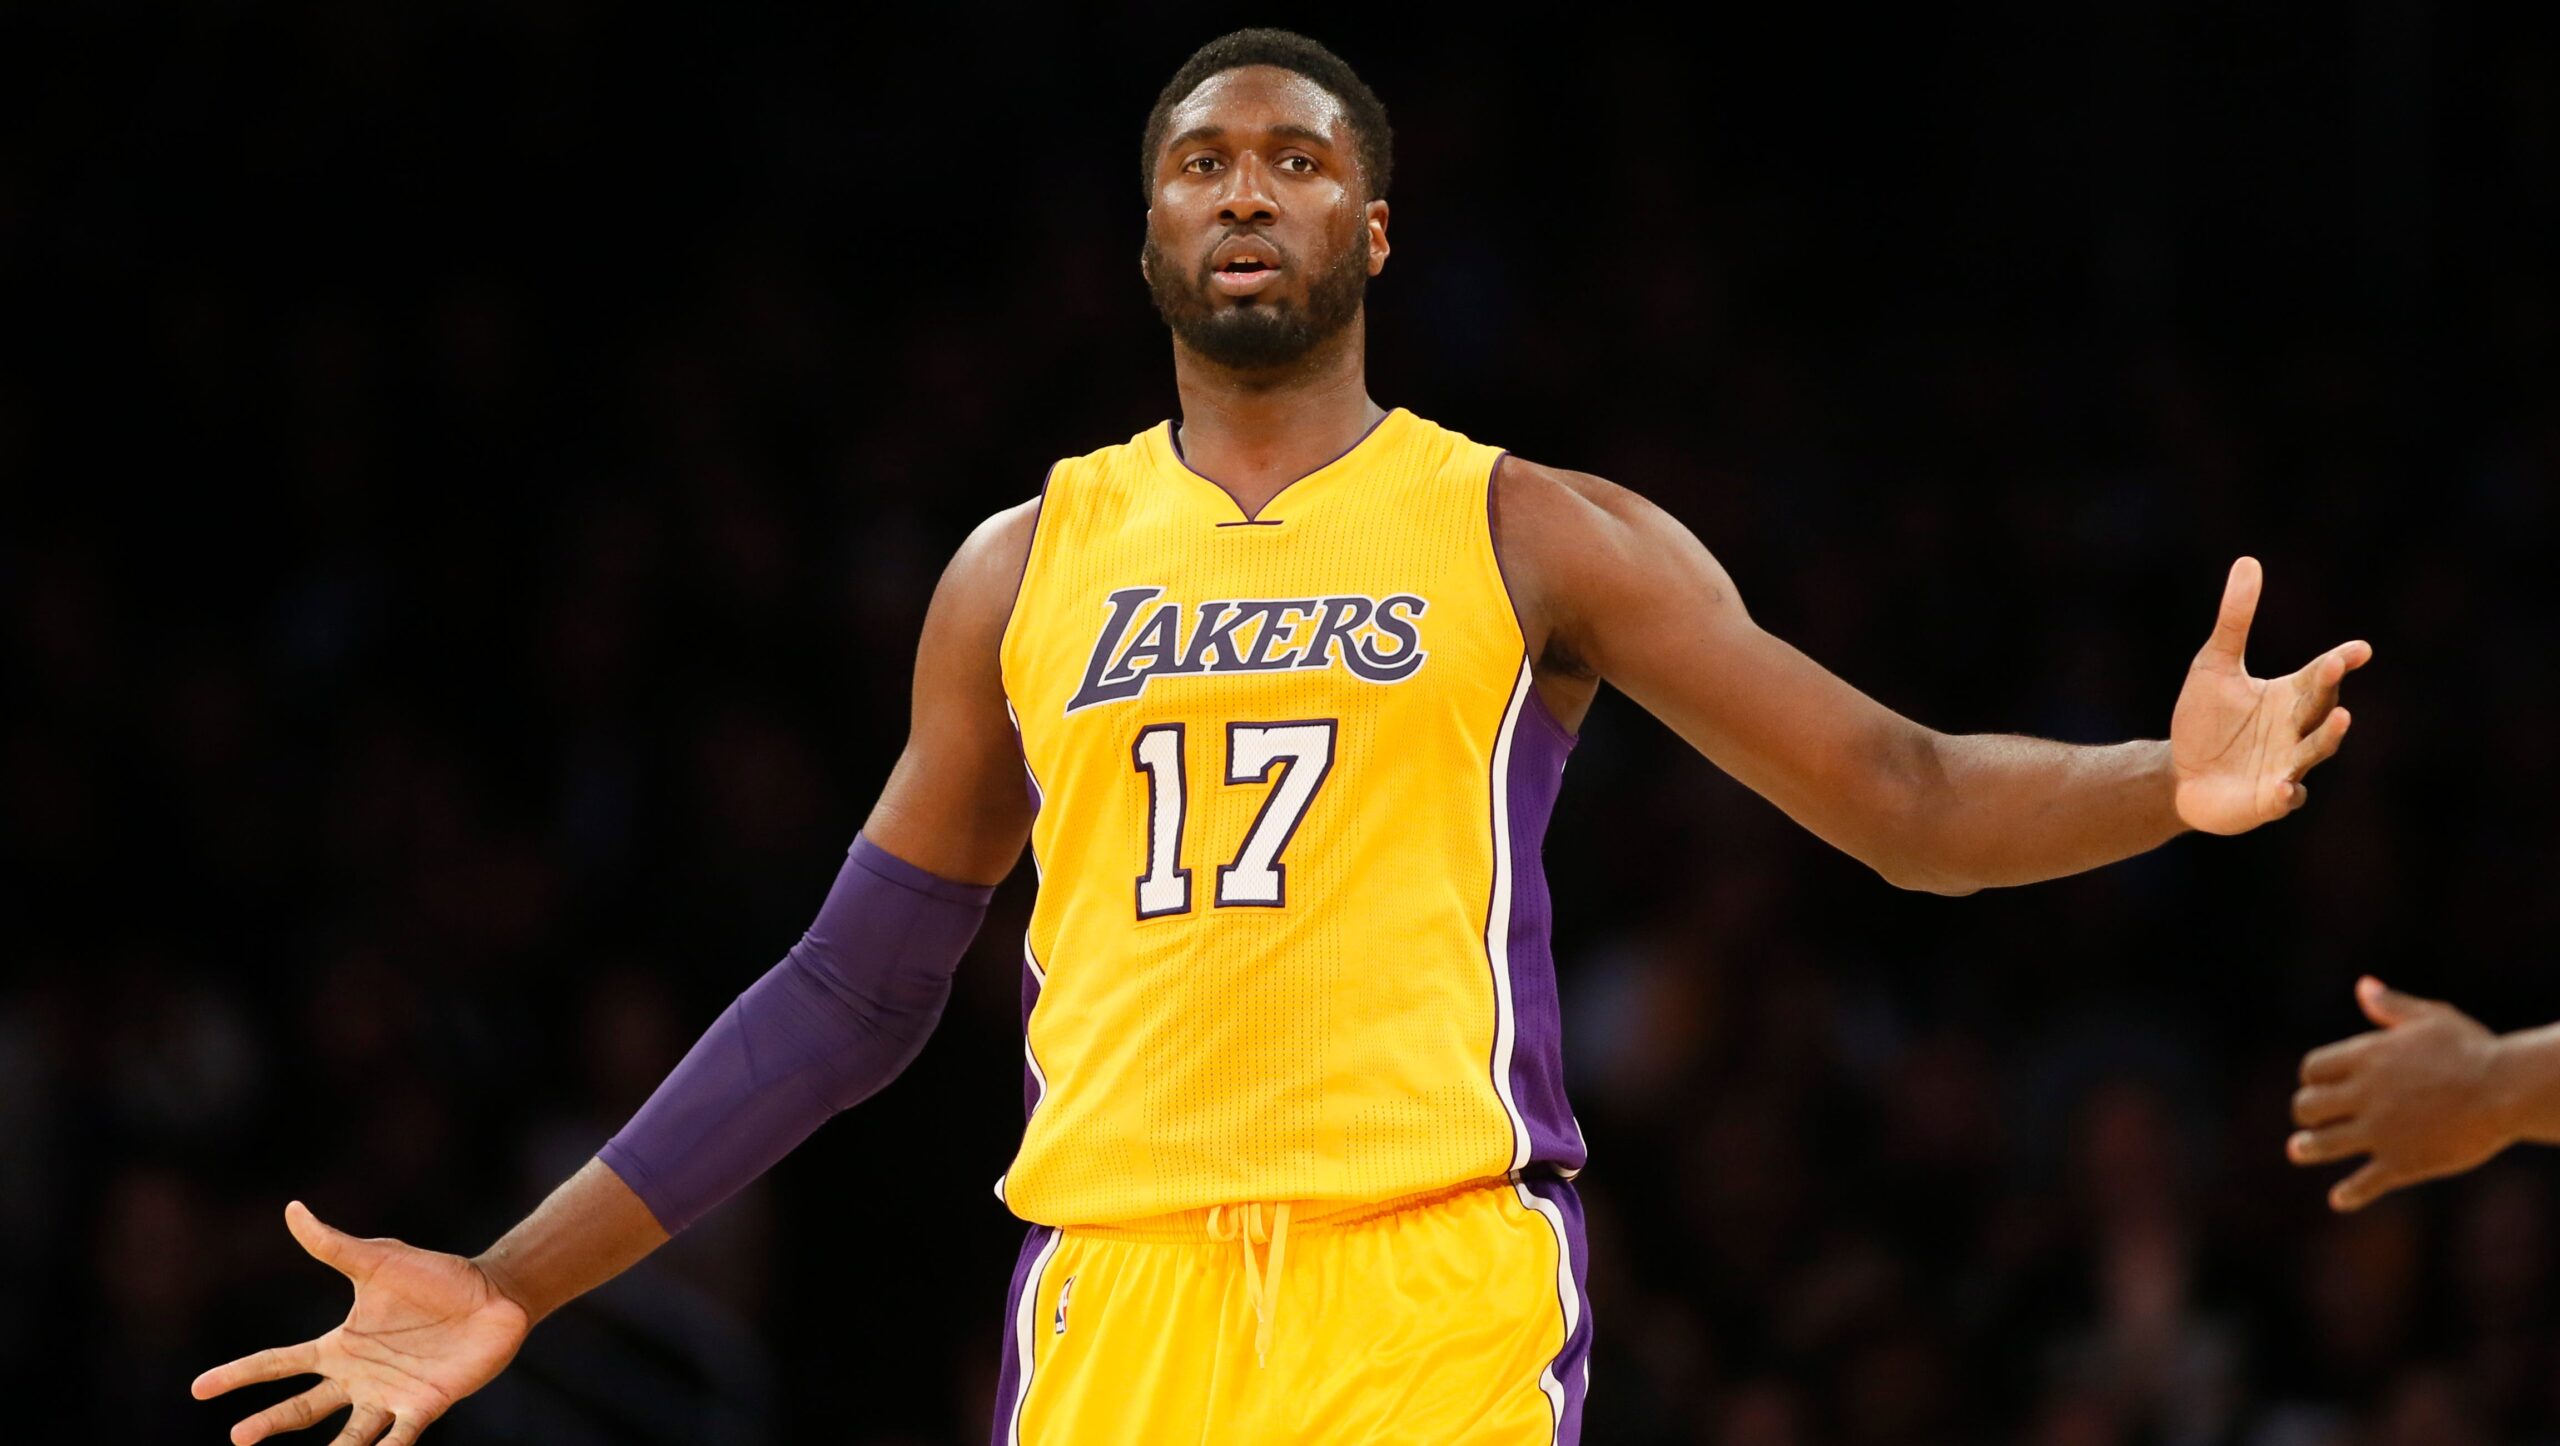 Roy Hibbert with Lakers (Source: indystar.com)